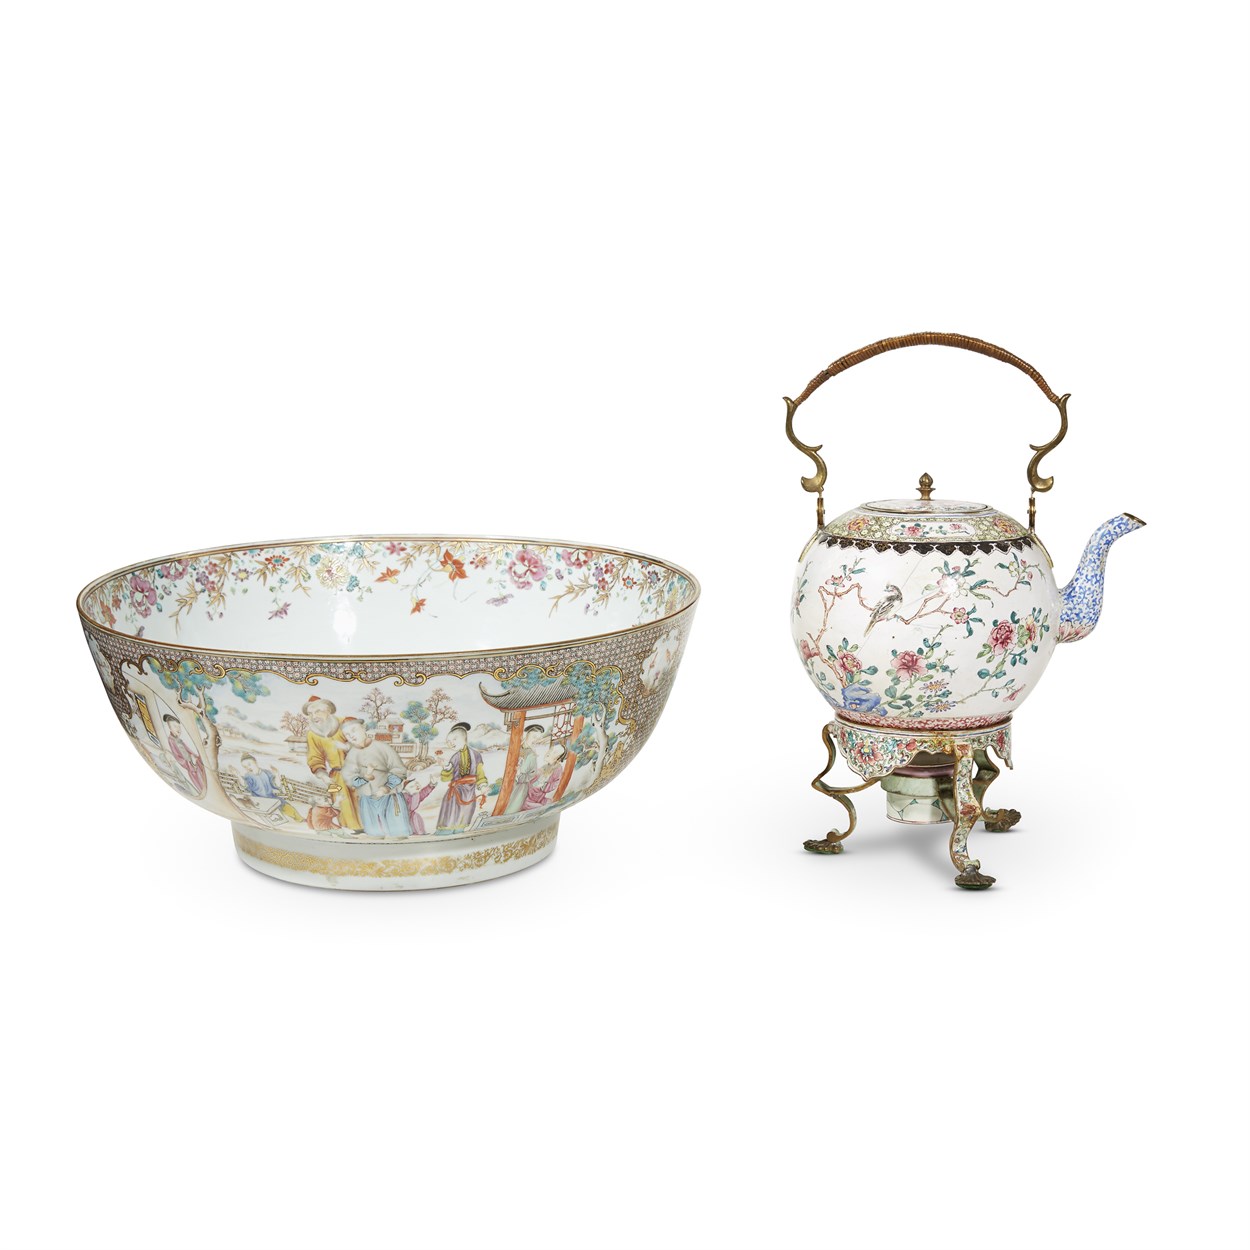 Lot 106 - A Chinese export porcelain famille rose punch bowl